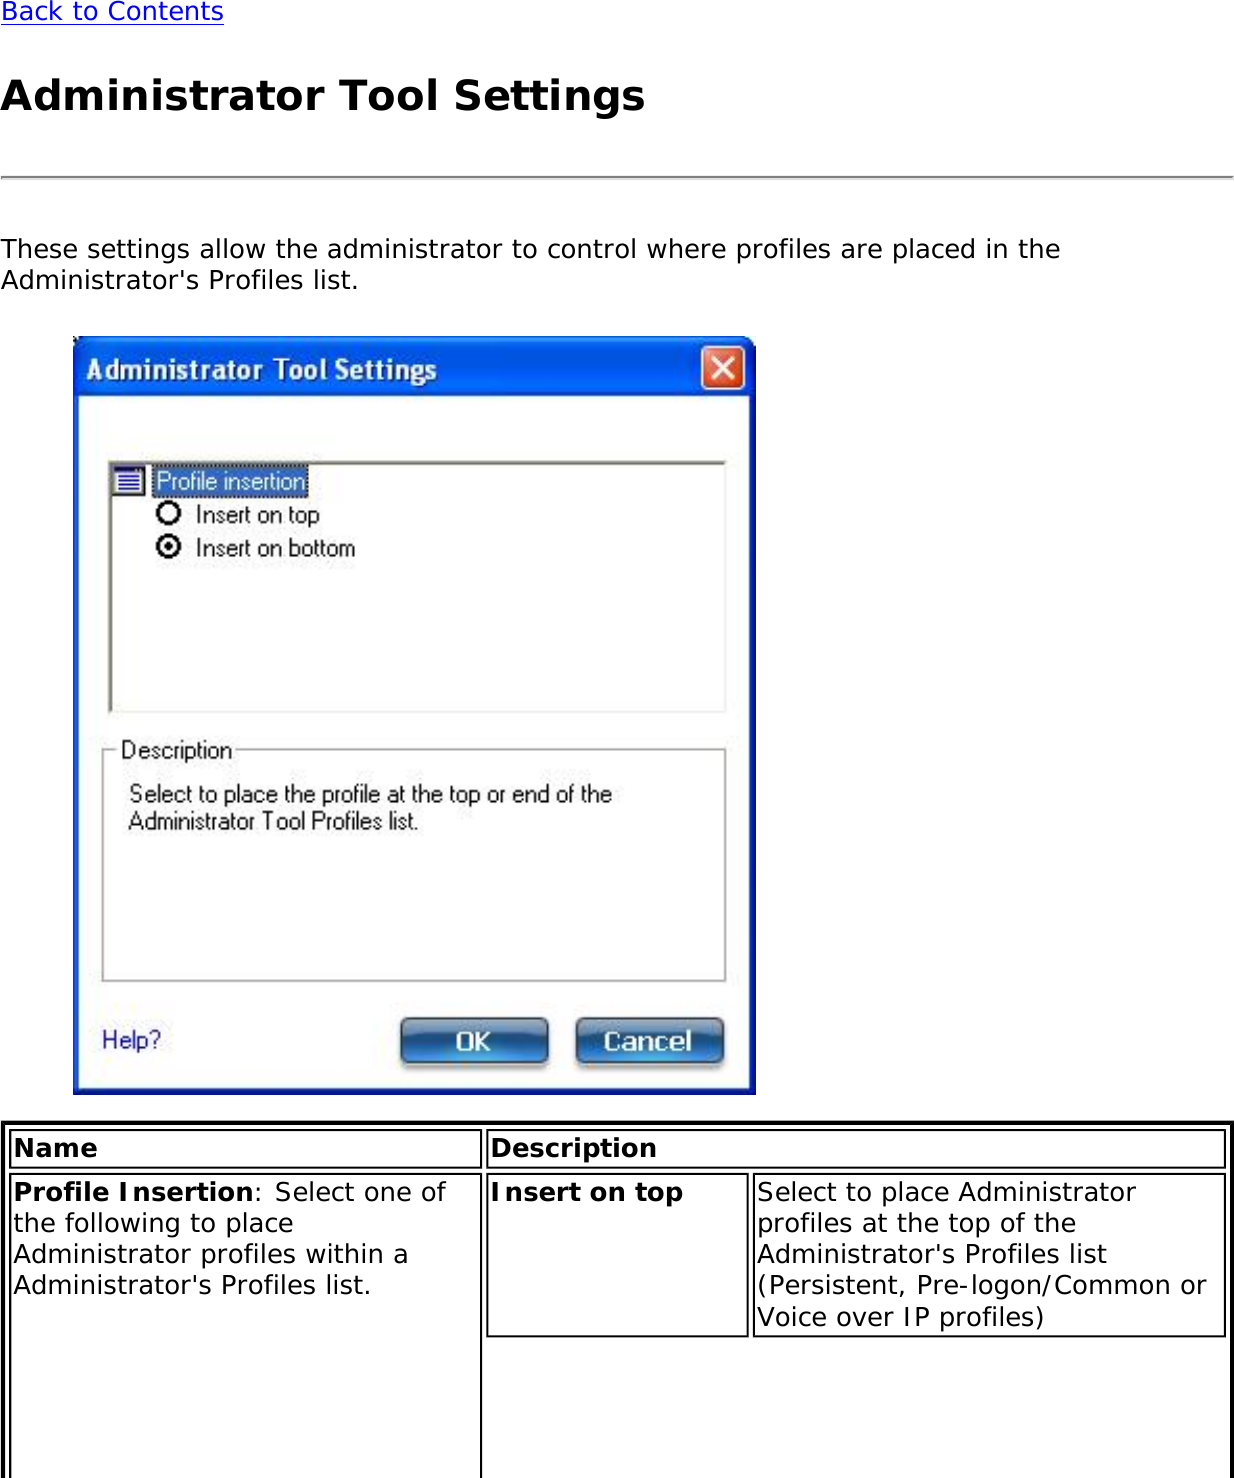 Back to ContentsAdministrator Tool SettingsThese settings allow the administrator to control where profiles are placed in the Administrator&apos;s Profiles list. Name DescriptionProfile Insertion: Select one of the following to place Administrator profiles within a Administrator&apos;s Profiles list.Insert on top  Select to place Administrator profiles at the top of the Administrator&apos;s Profiles list (Persistent, Pre-logon/Common or Voice over IP profiles)